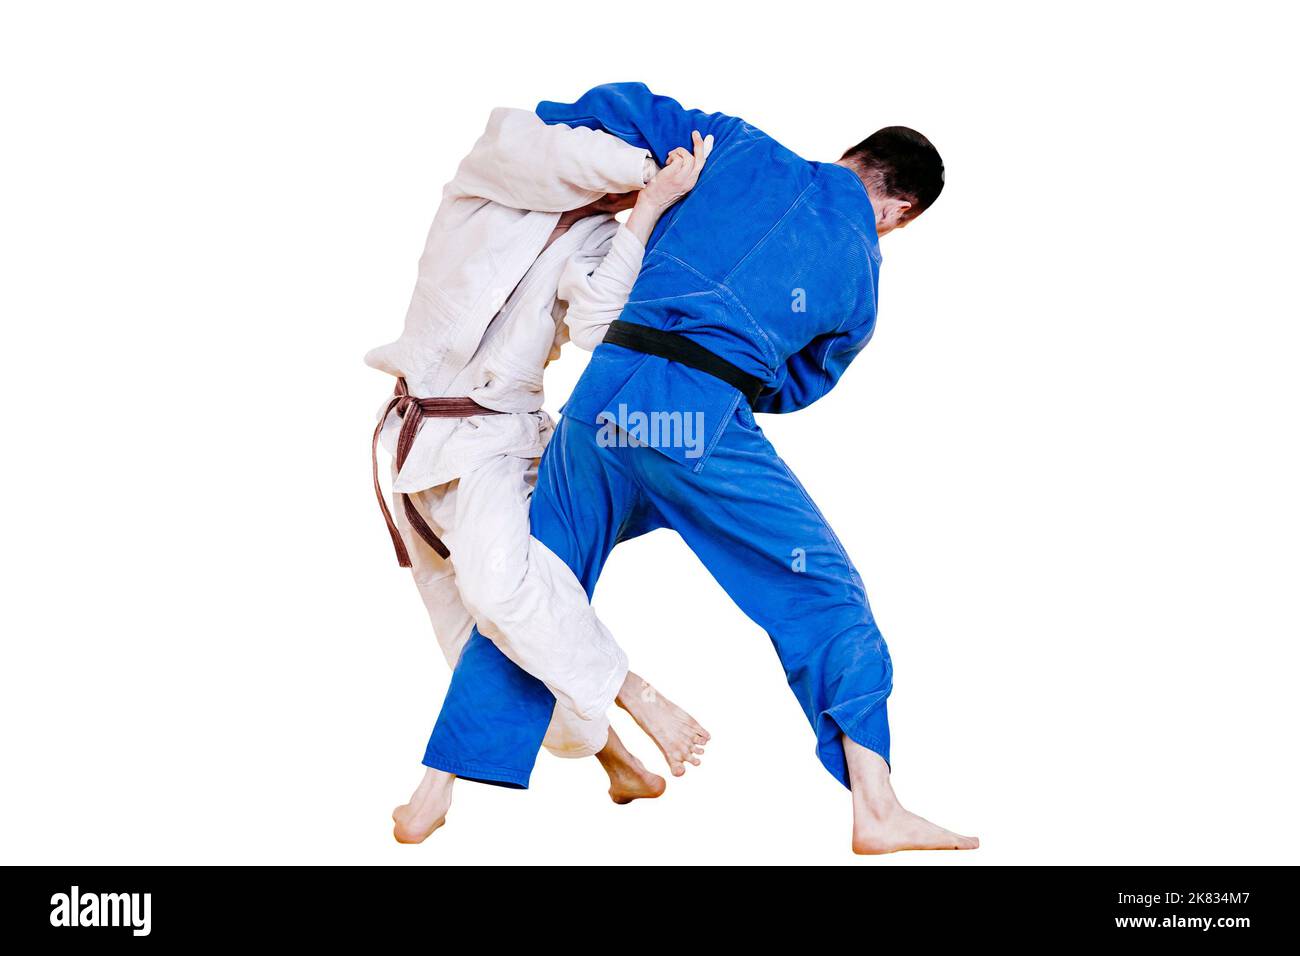 judo fighters fight in judo competition Stock Photo